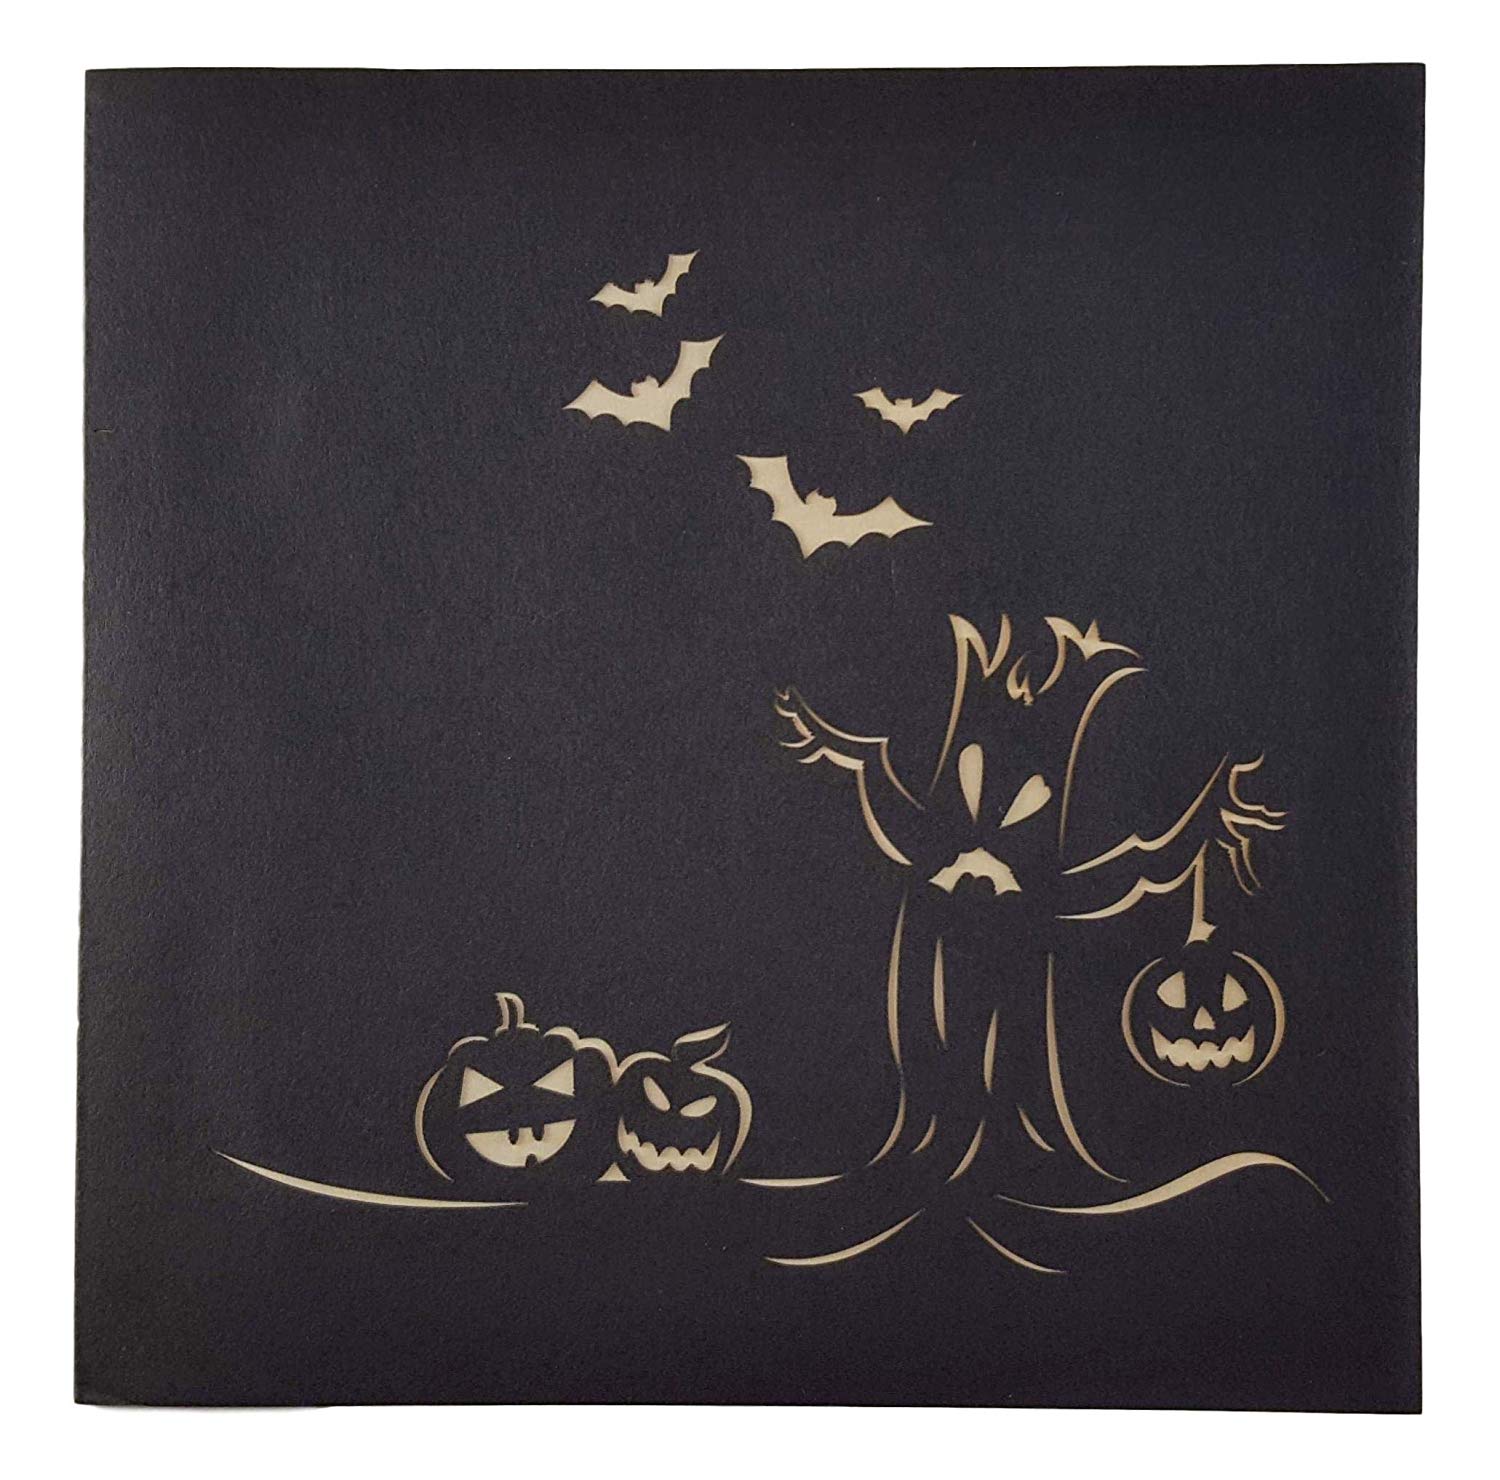 Spooky Tree and Jack-O-Lantern 3D Pop Up Greeting Card - Halloween - iGifts And Cards